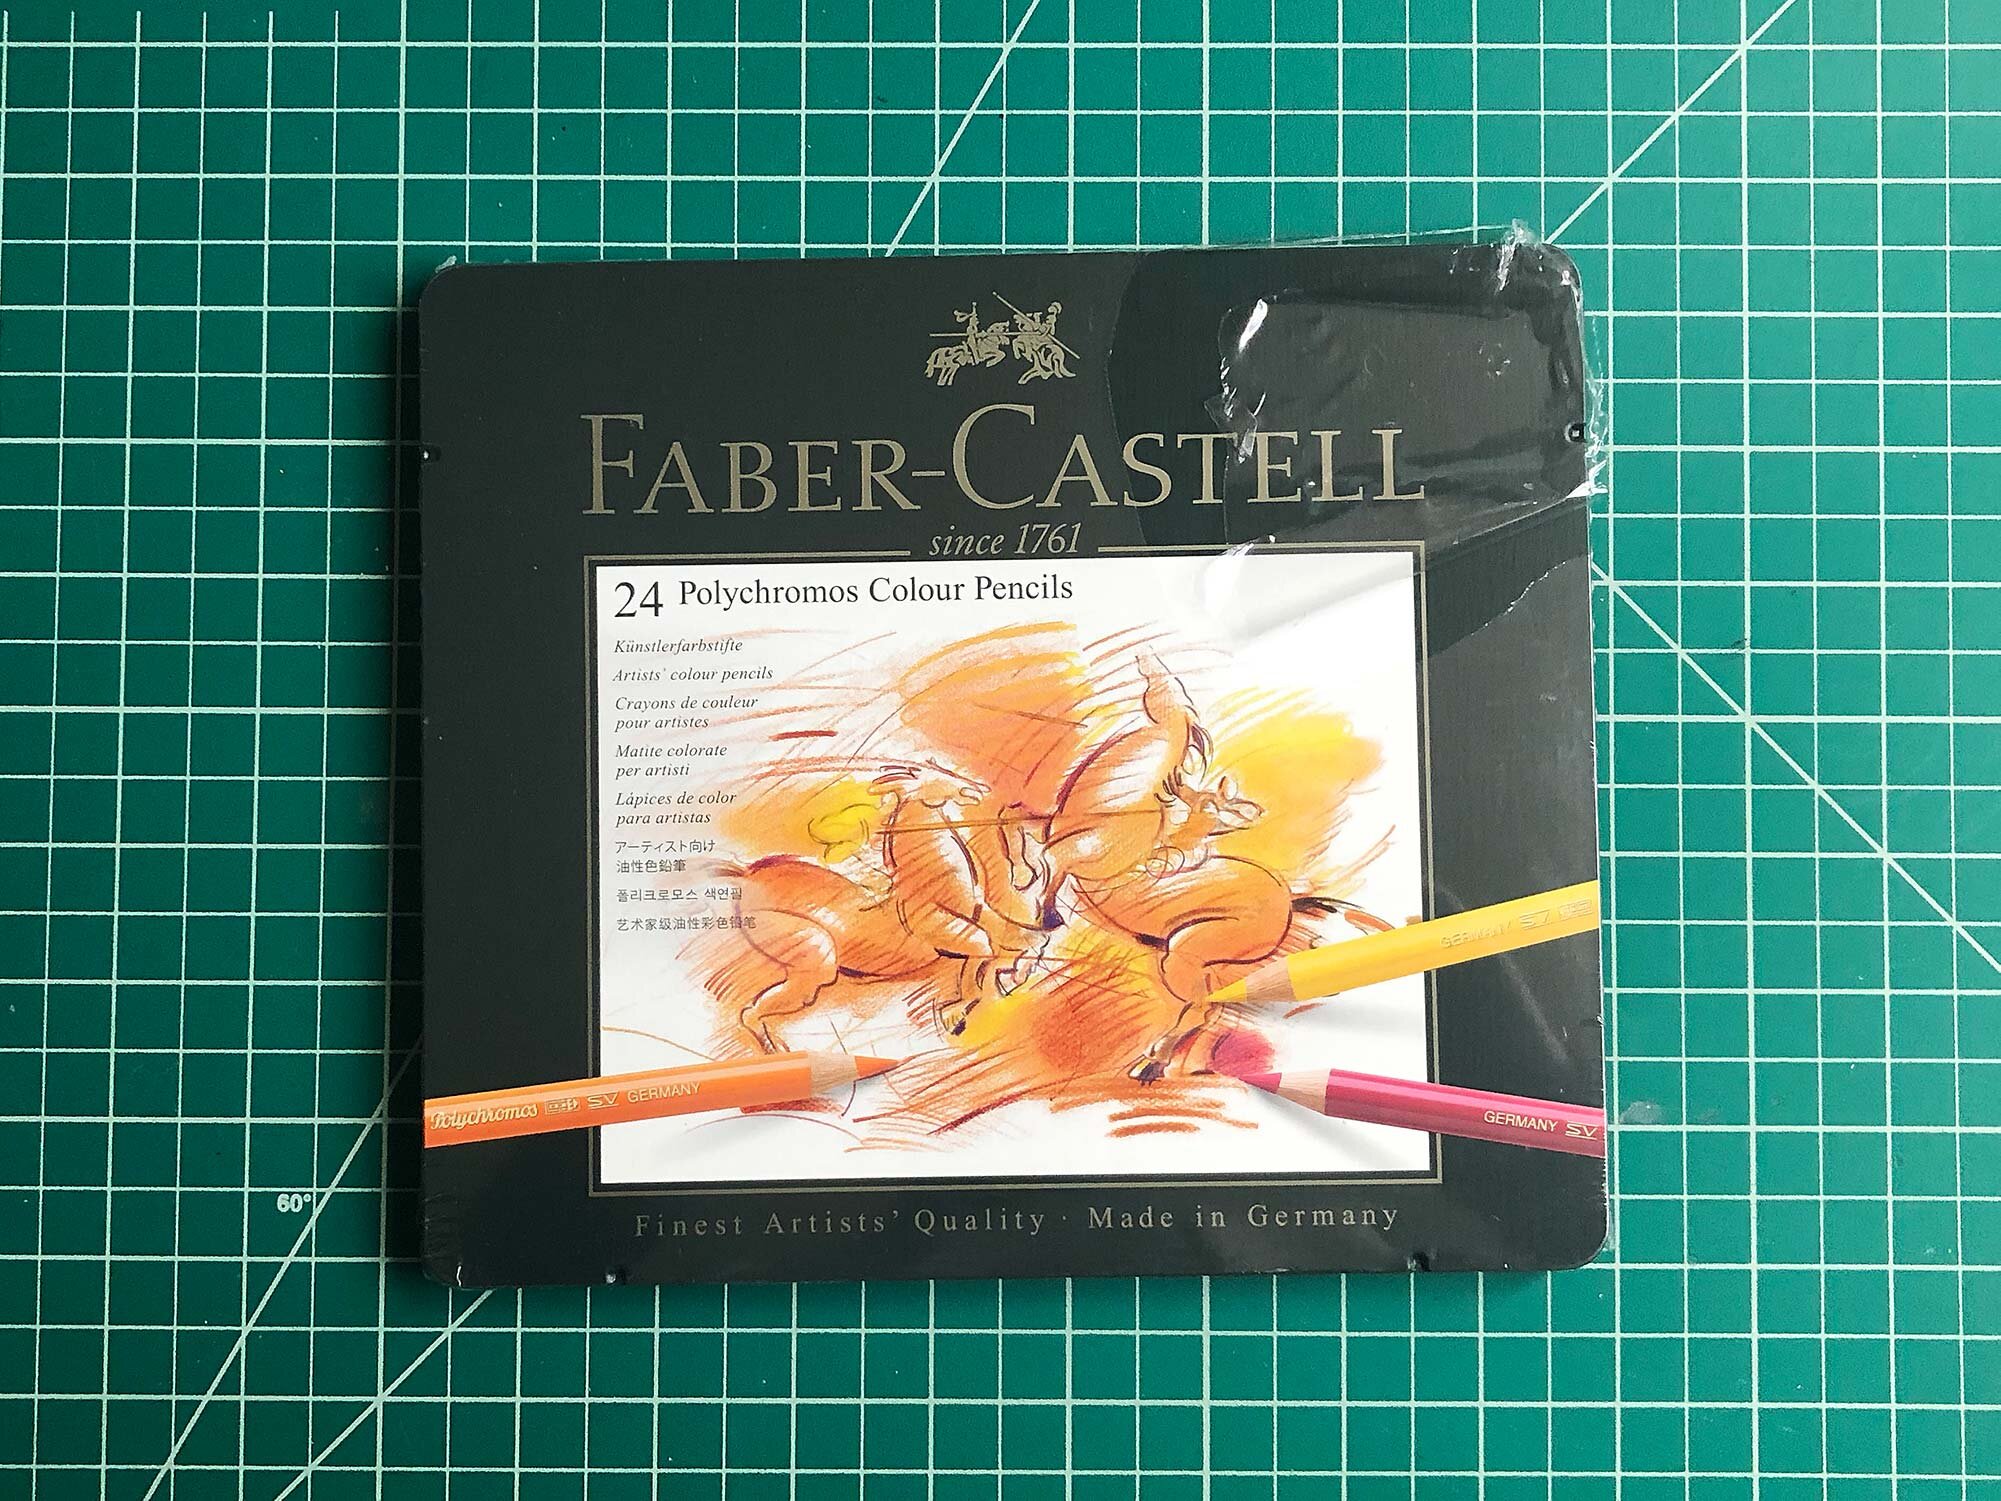 Faber-Castell — Posts — The Studio Manager